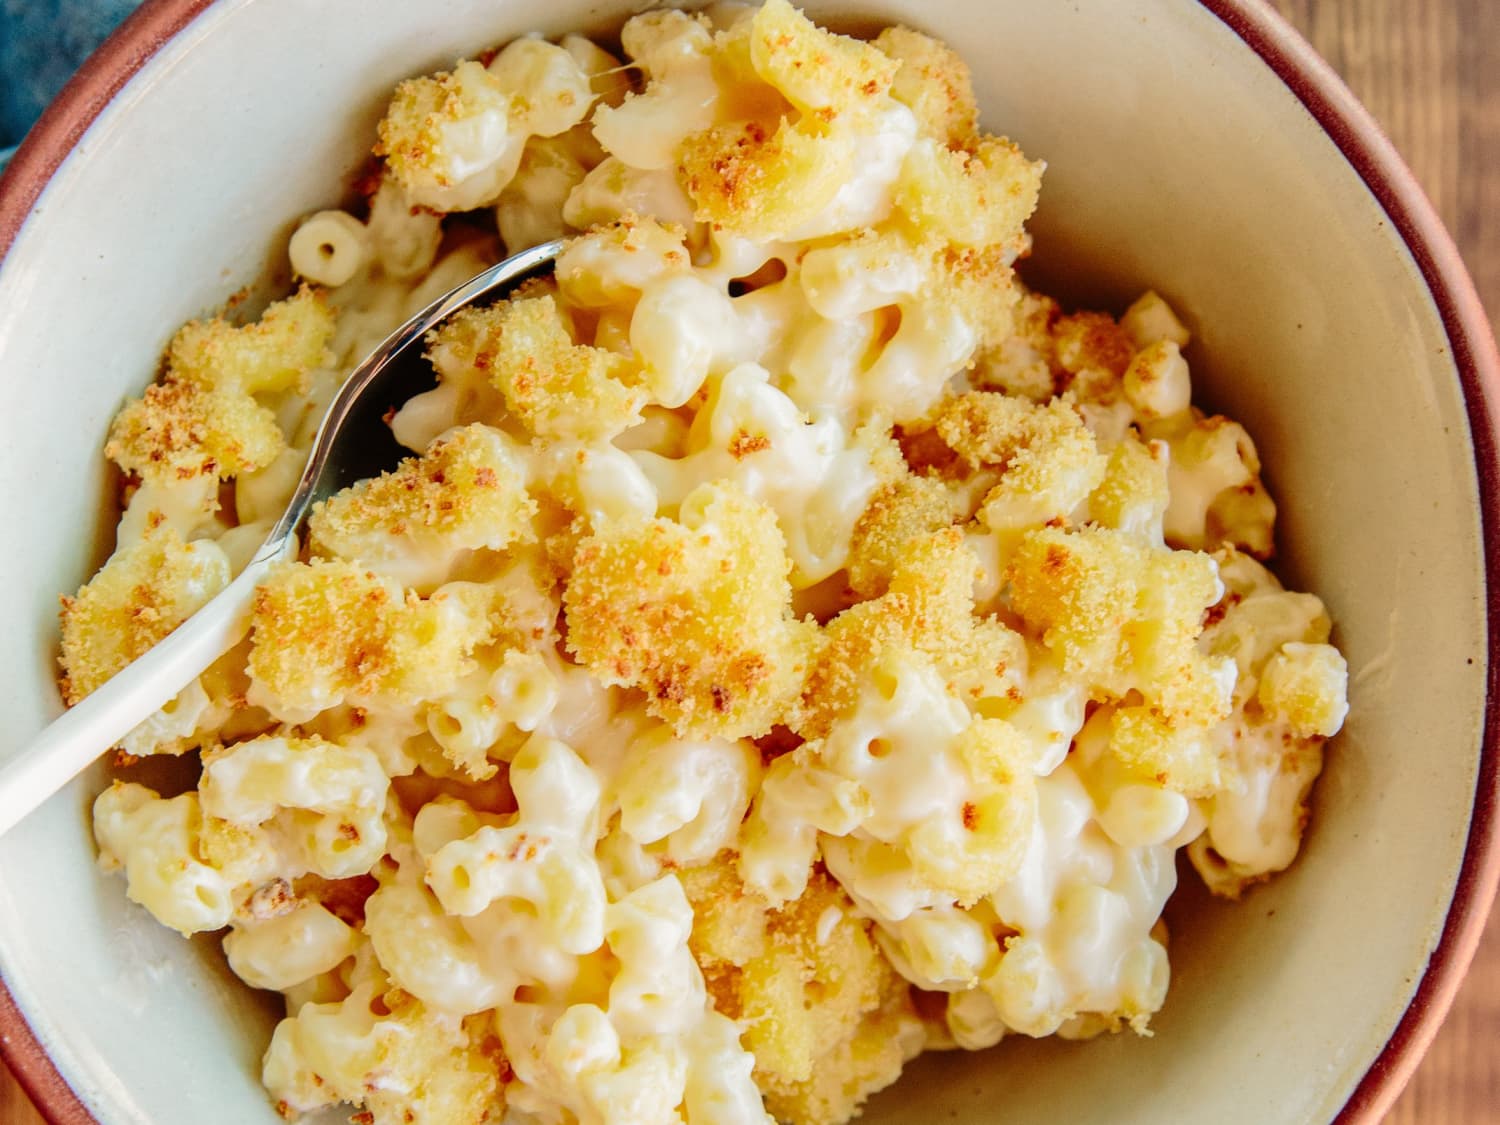 Baked Mac and Cheese - The Cozy Cook